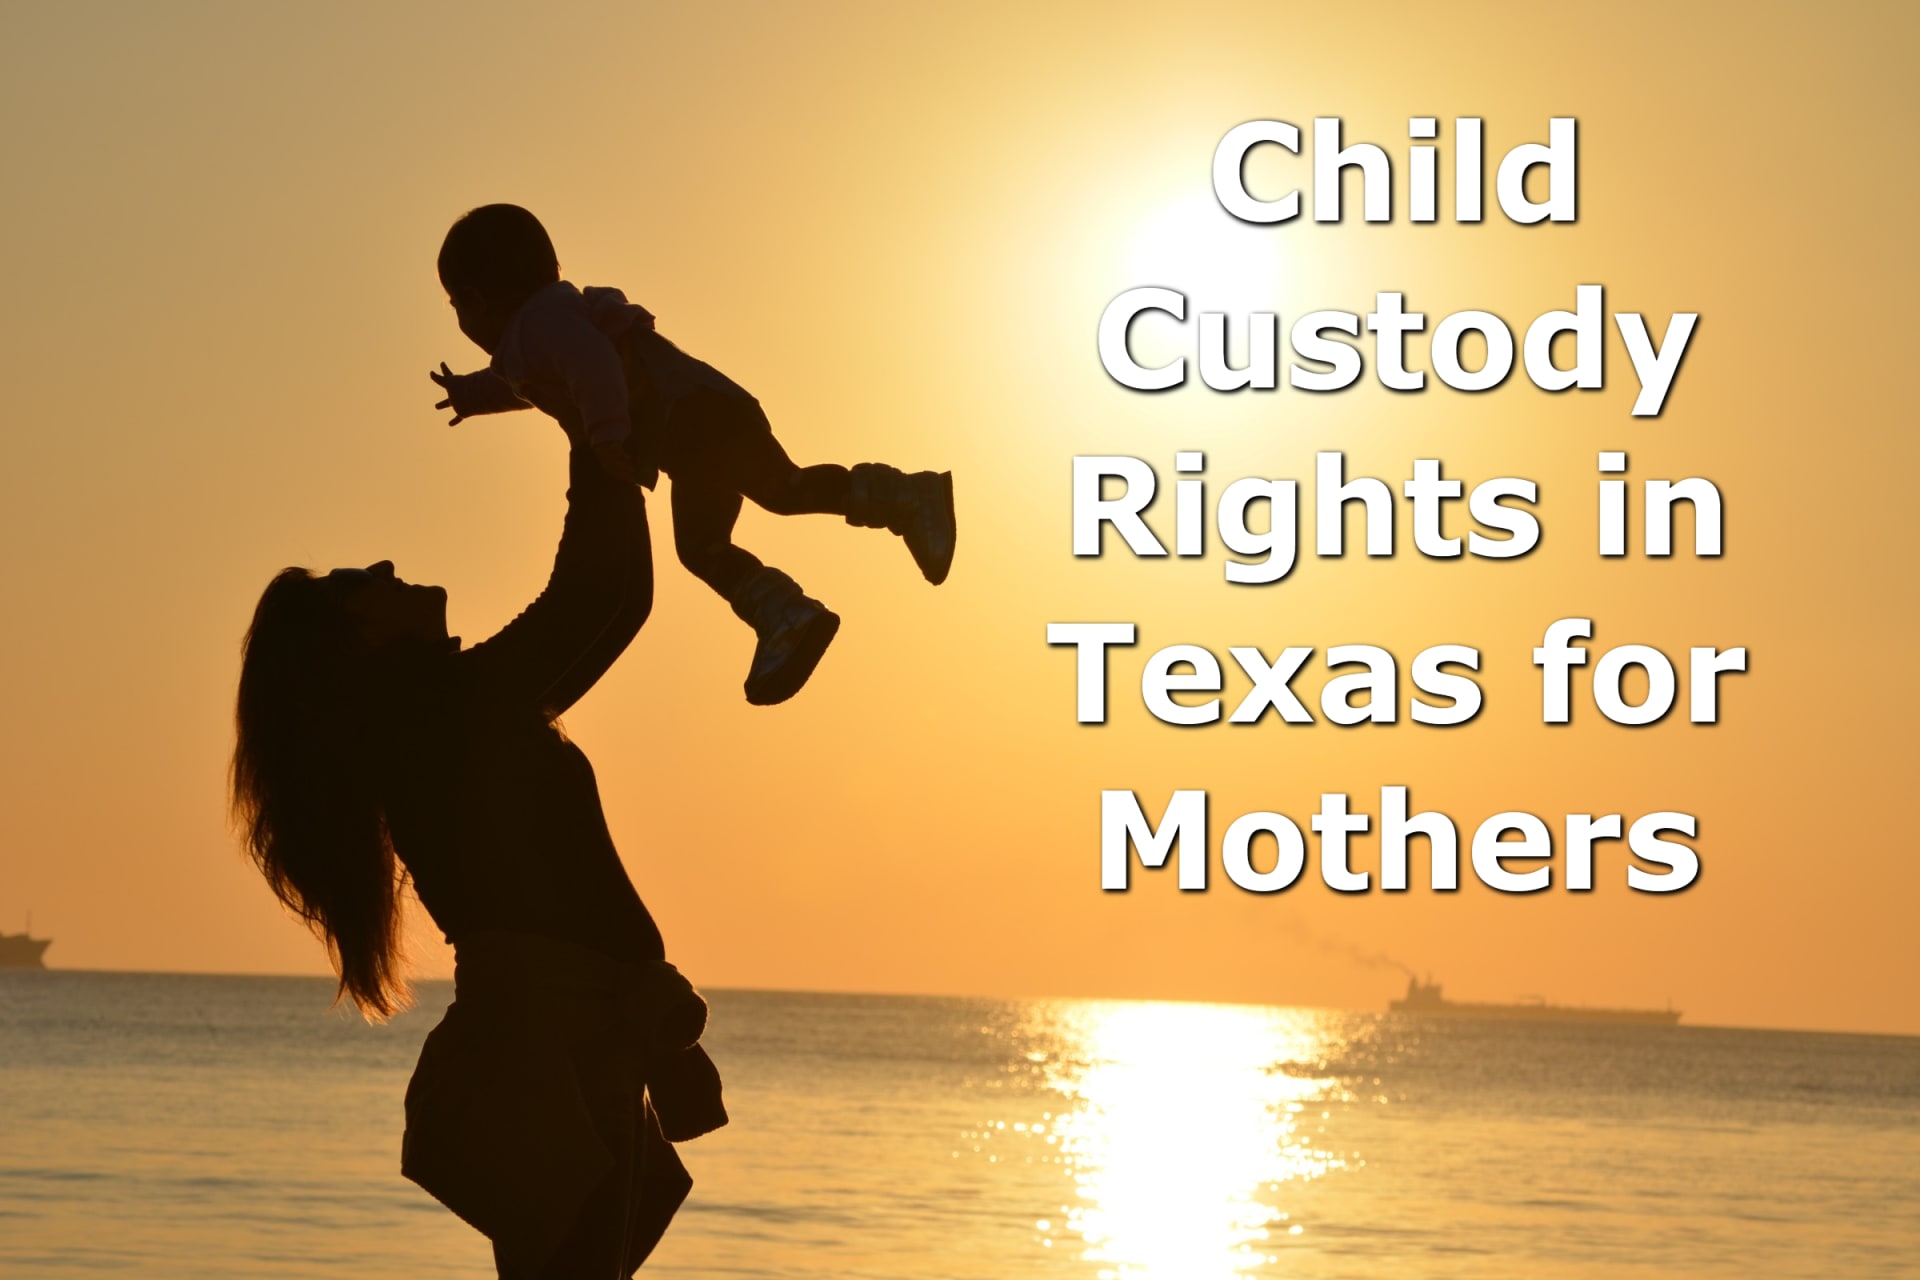 Child Custody Rights in Texas for Mothers